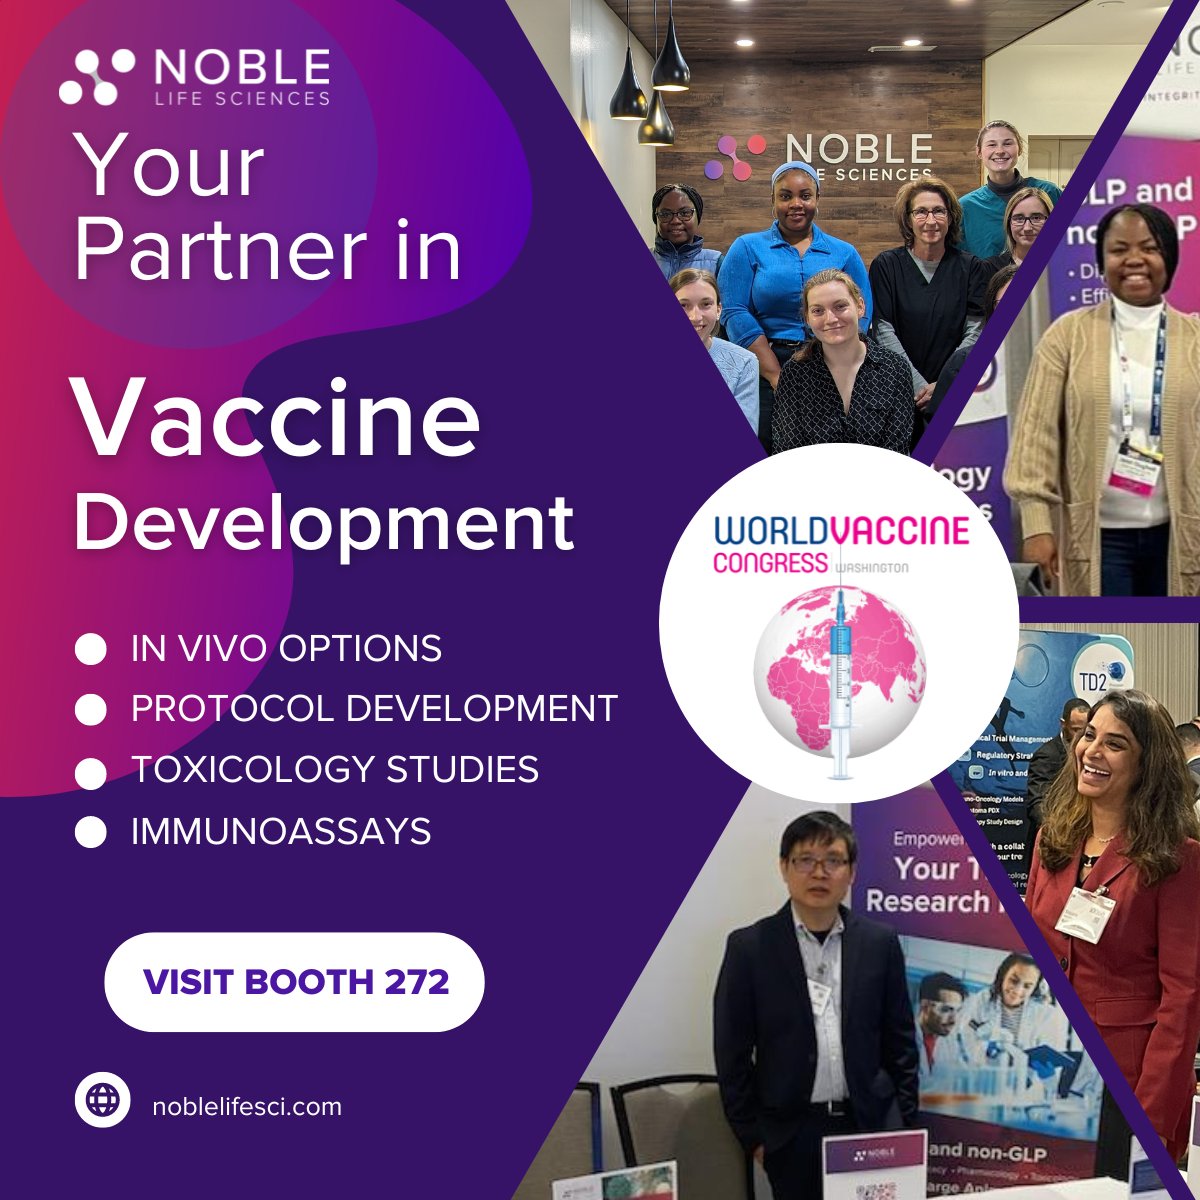 It's day 3 of #WVCDC and we're still going strong! Don't miss out on the chance to connect with us at booth 272. See you there! 

#vaccines #therapeutics #infectiousdisease #vaccinedevelopment #biotechindustry #washington